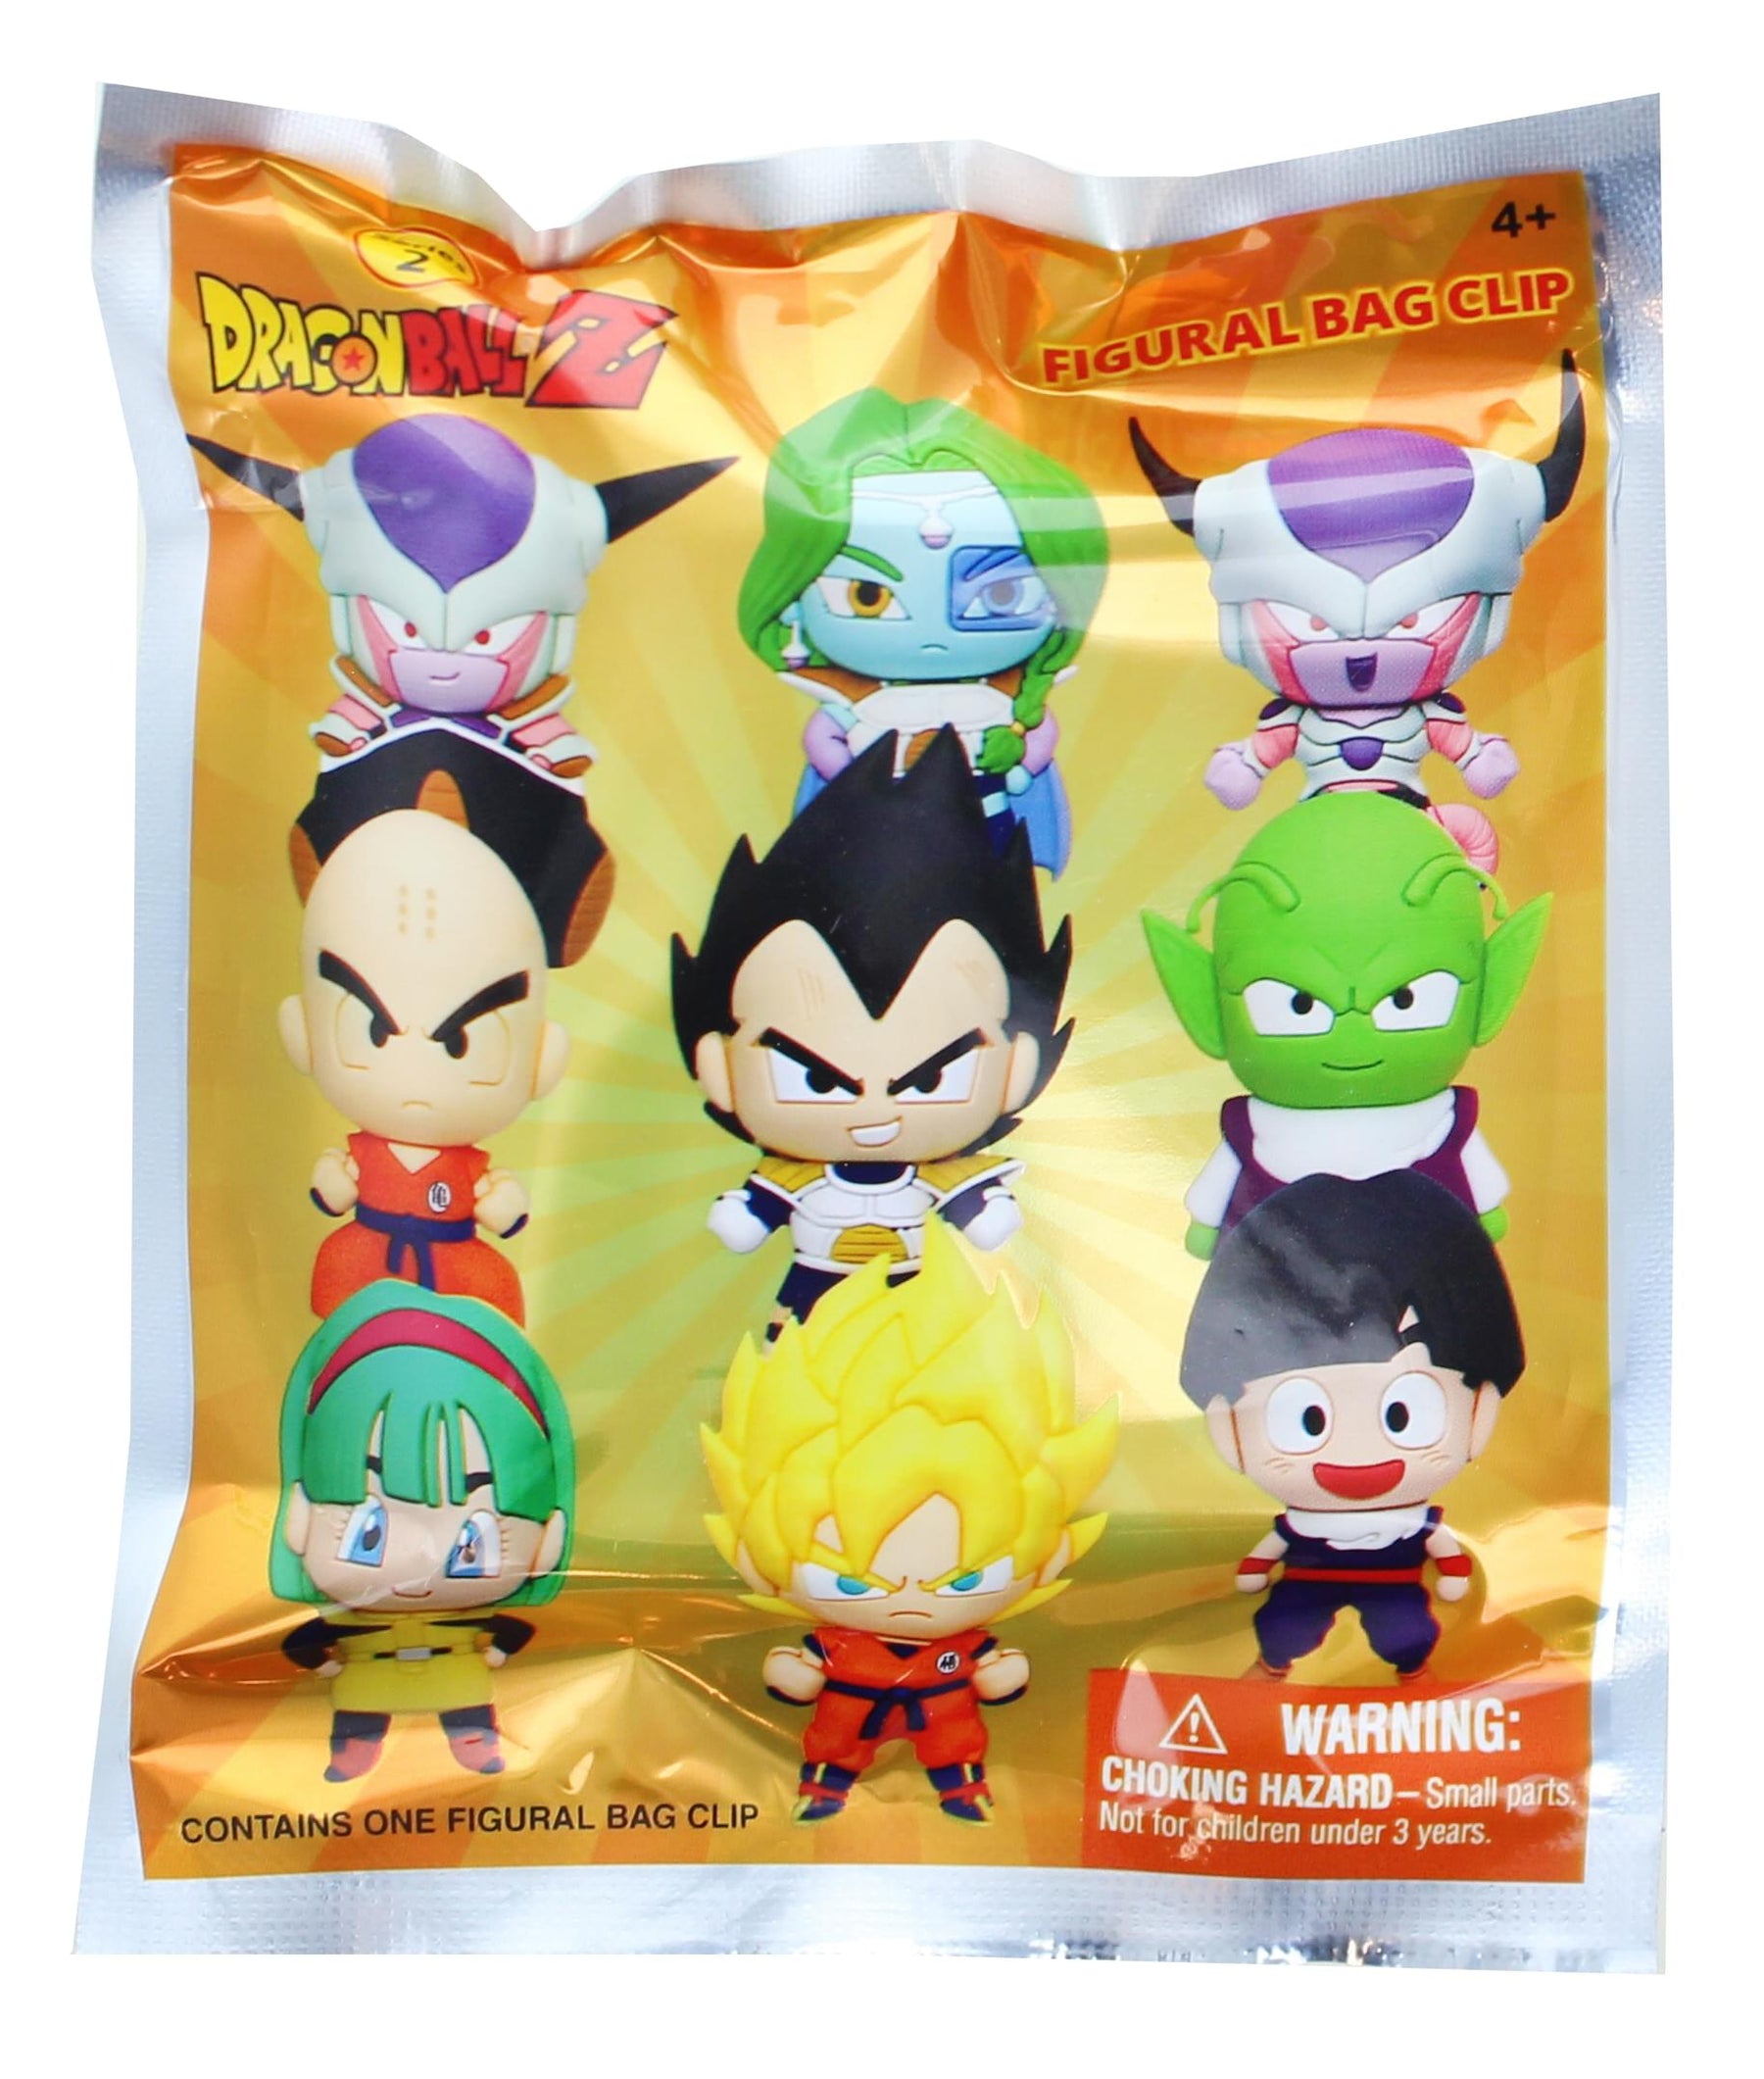 Dragon Ball Z Backpack (Price Includes Shipping)